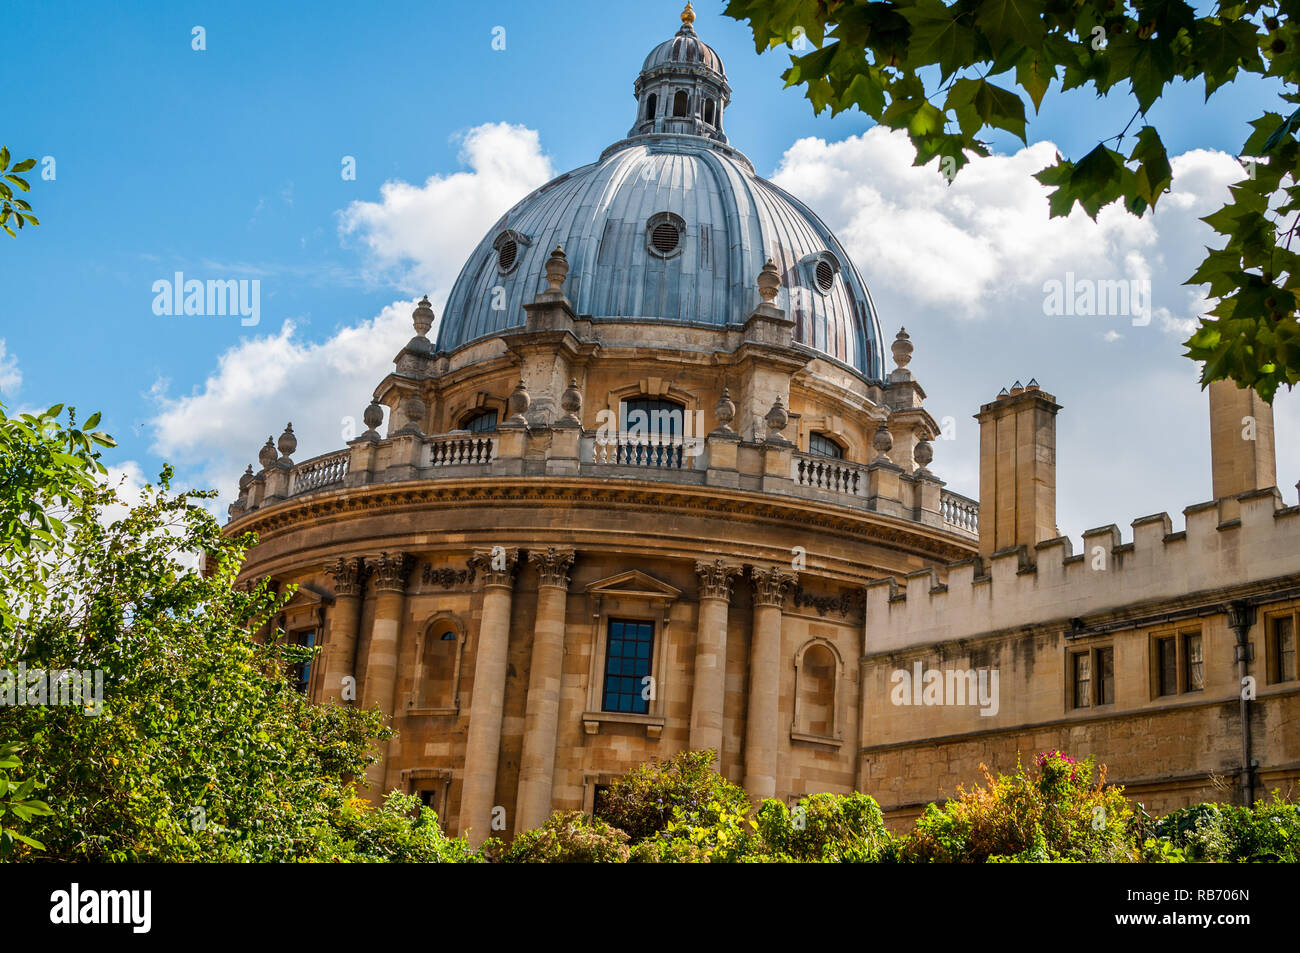 The Radcliffe camera in Oxford shot from a rare angle. Stock Photo